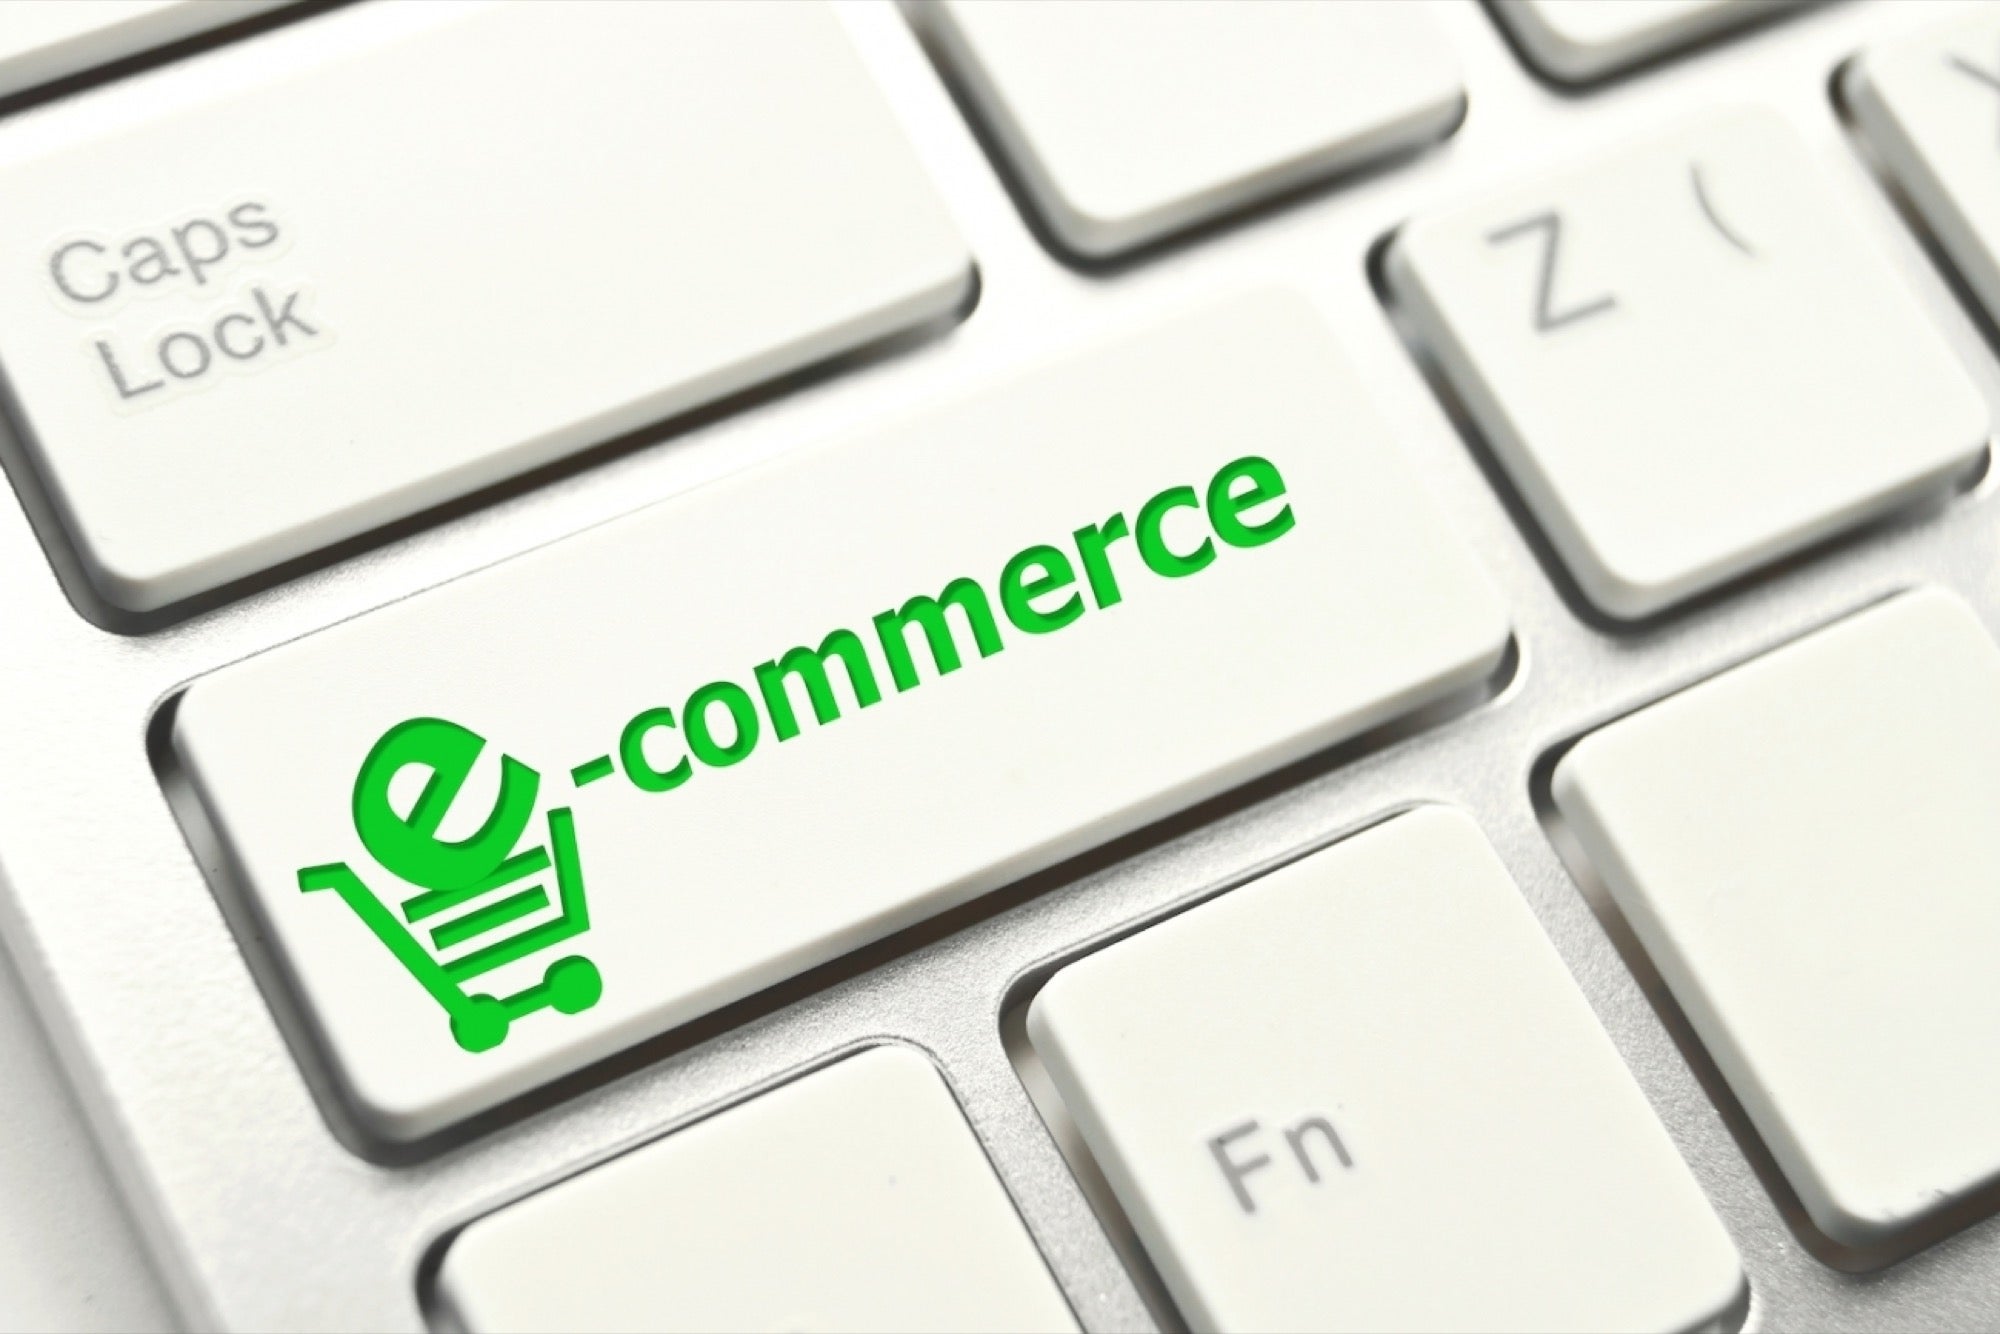 A deeper insight into the world of Ecommerce!